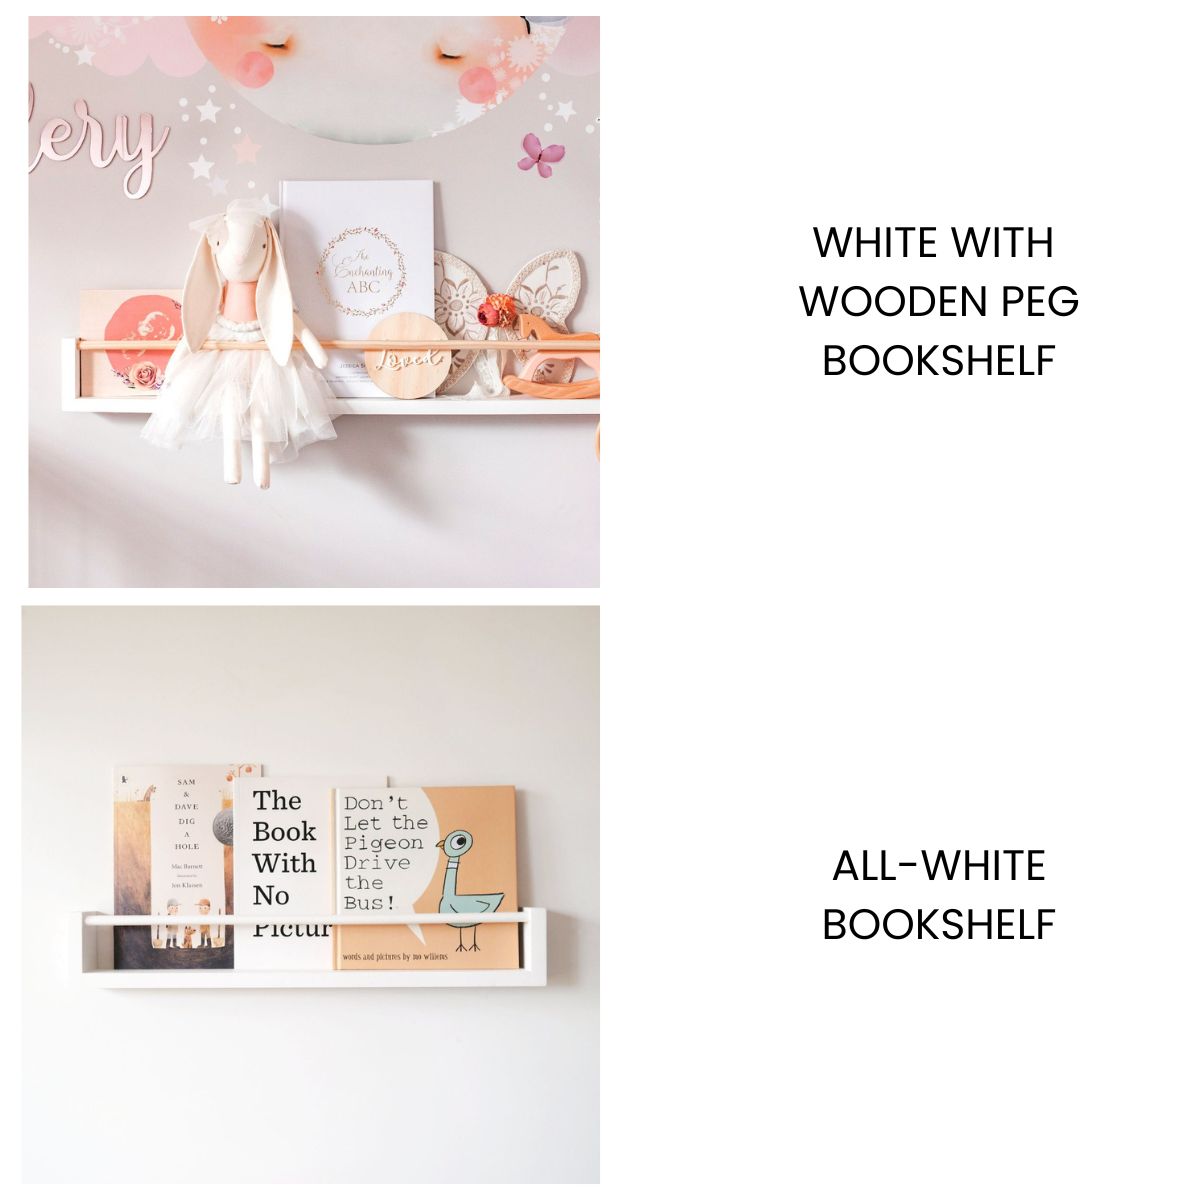 This is to compare between white with wooden peg versus an all-white bookshelf